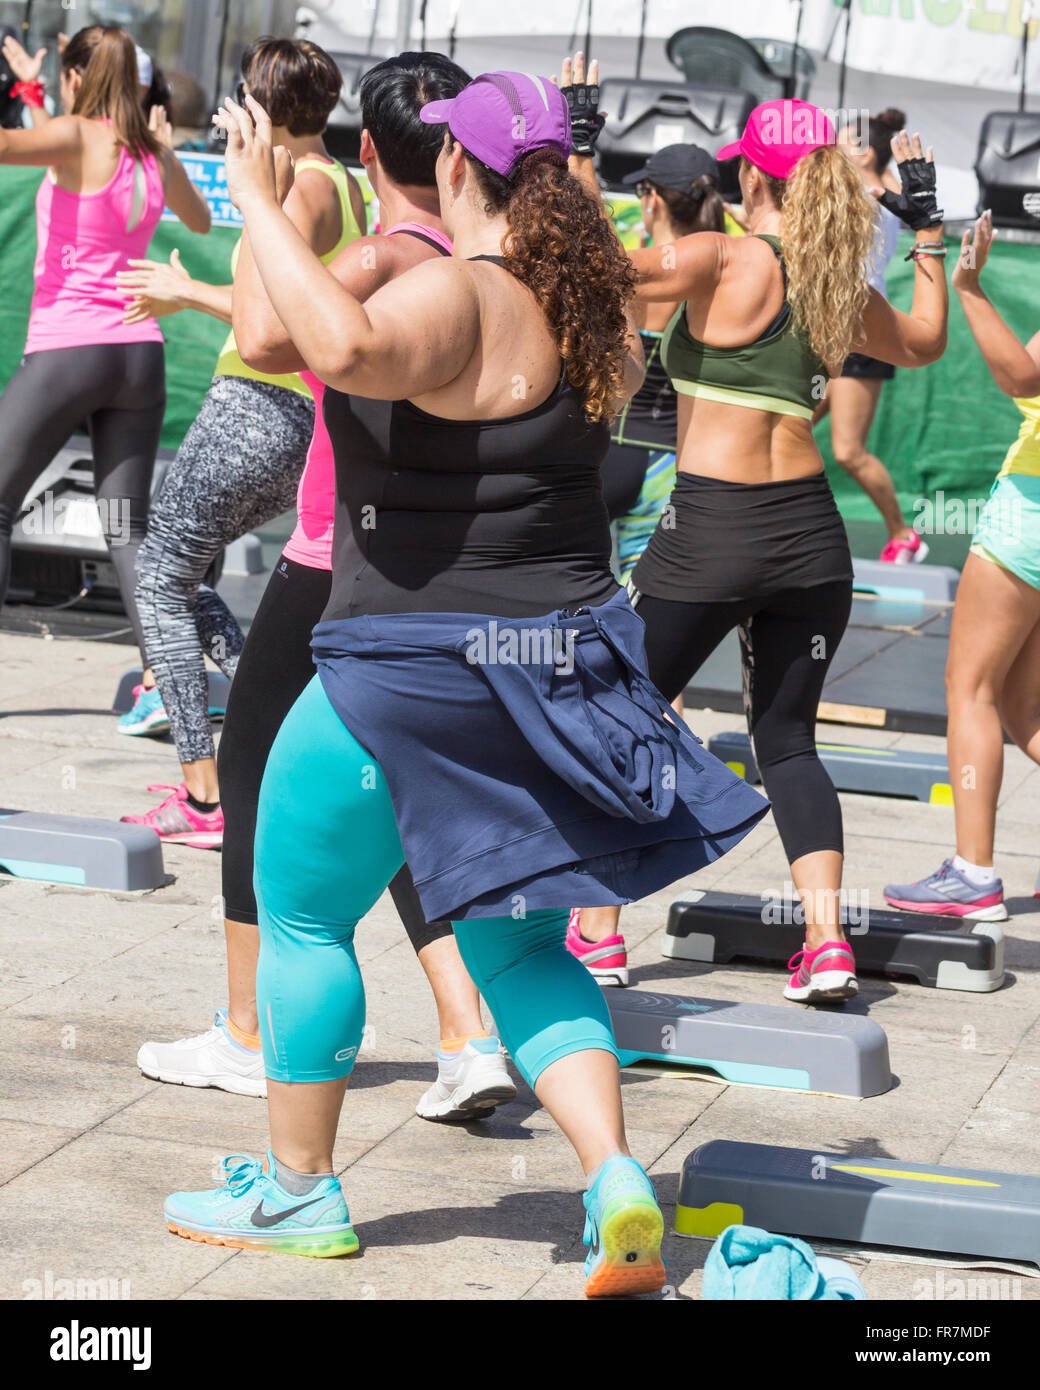 https://c8.alamy.com/comp/FR7MDF/large-woman-at-outdoors-zumba-aerobics-exercise-class-in-spain-FR7MDF.jpg